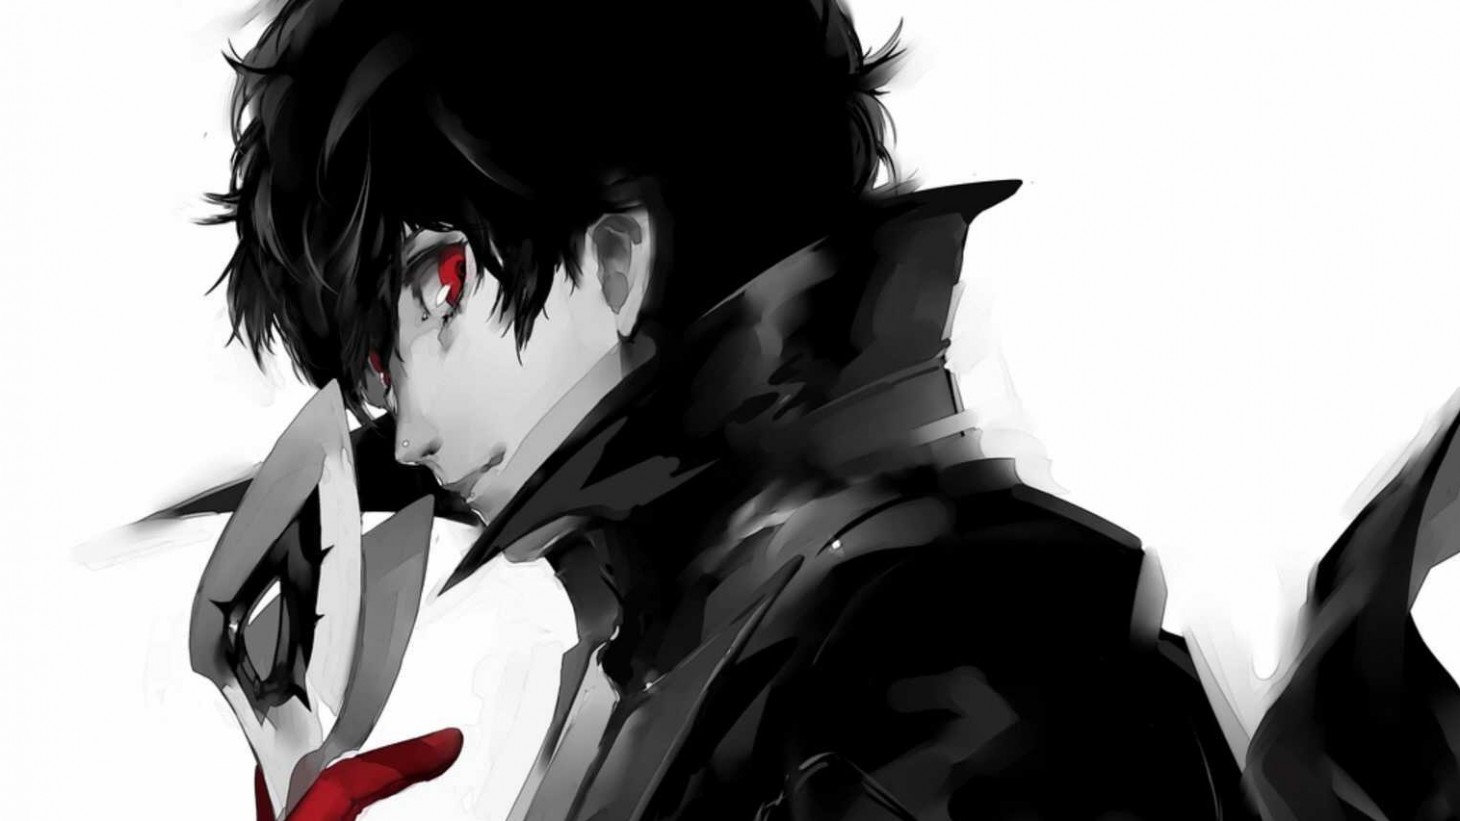 Persona 5 Royal' first impressions: Same same but different